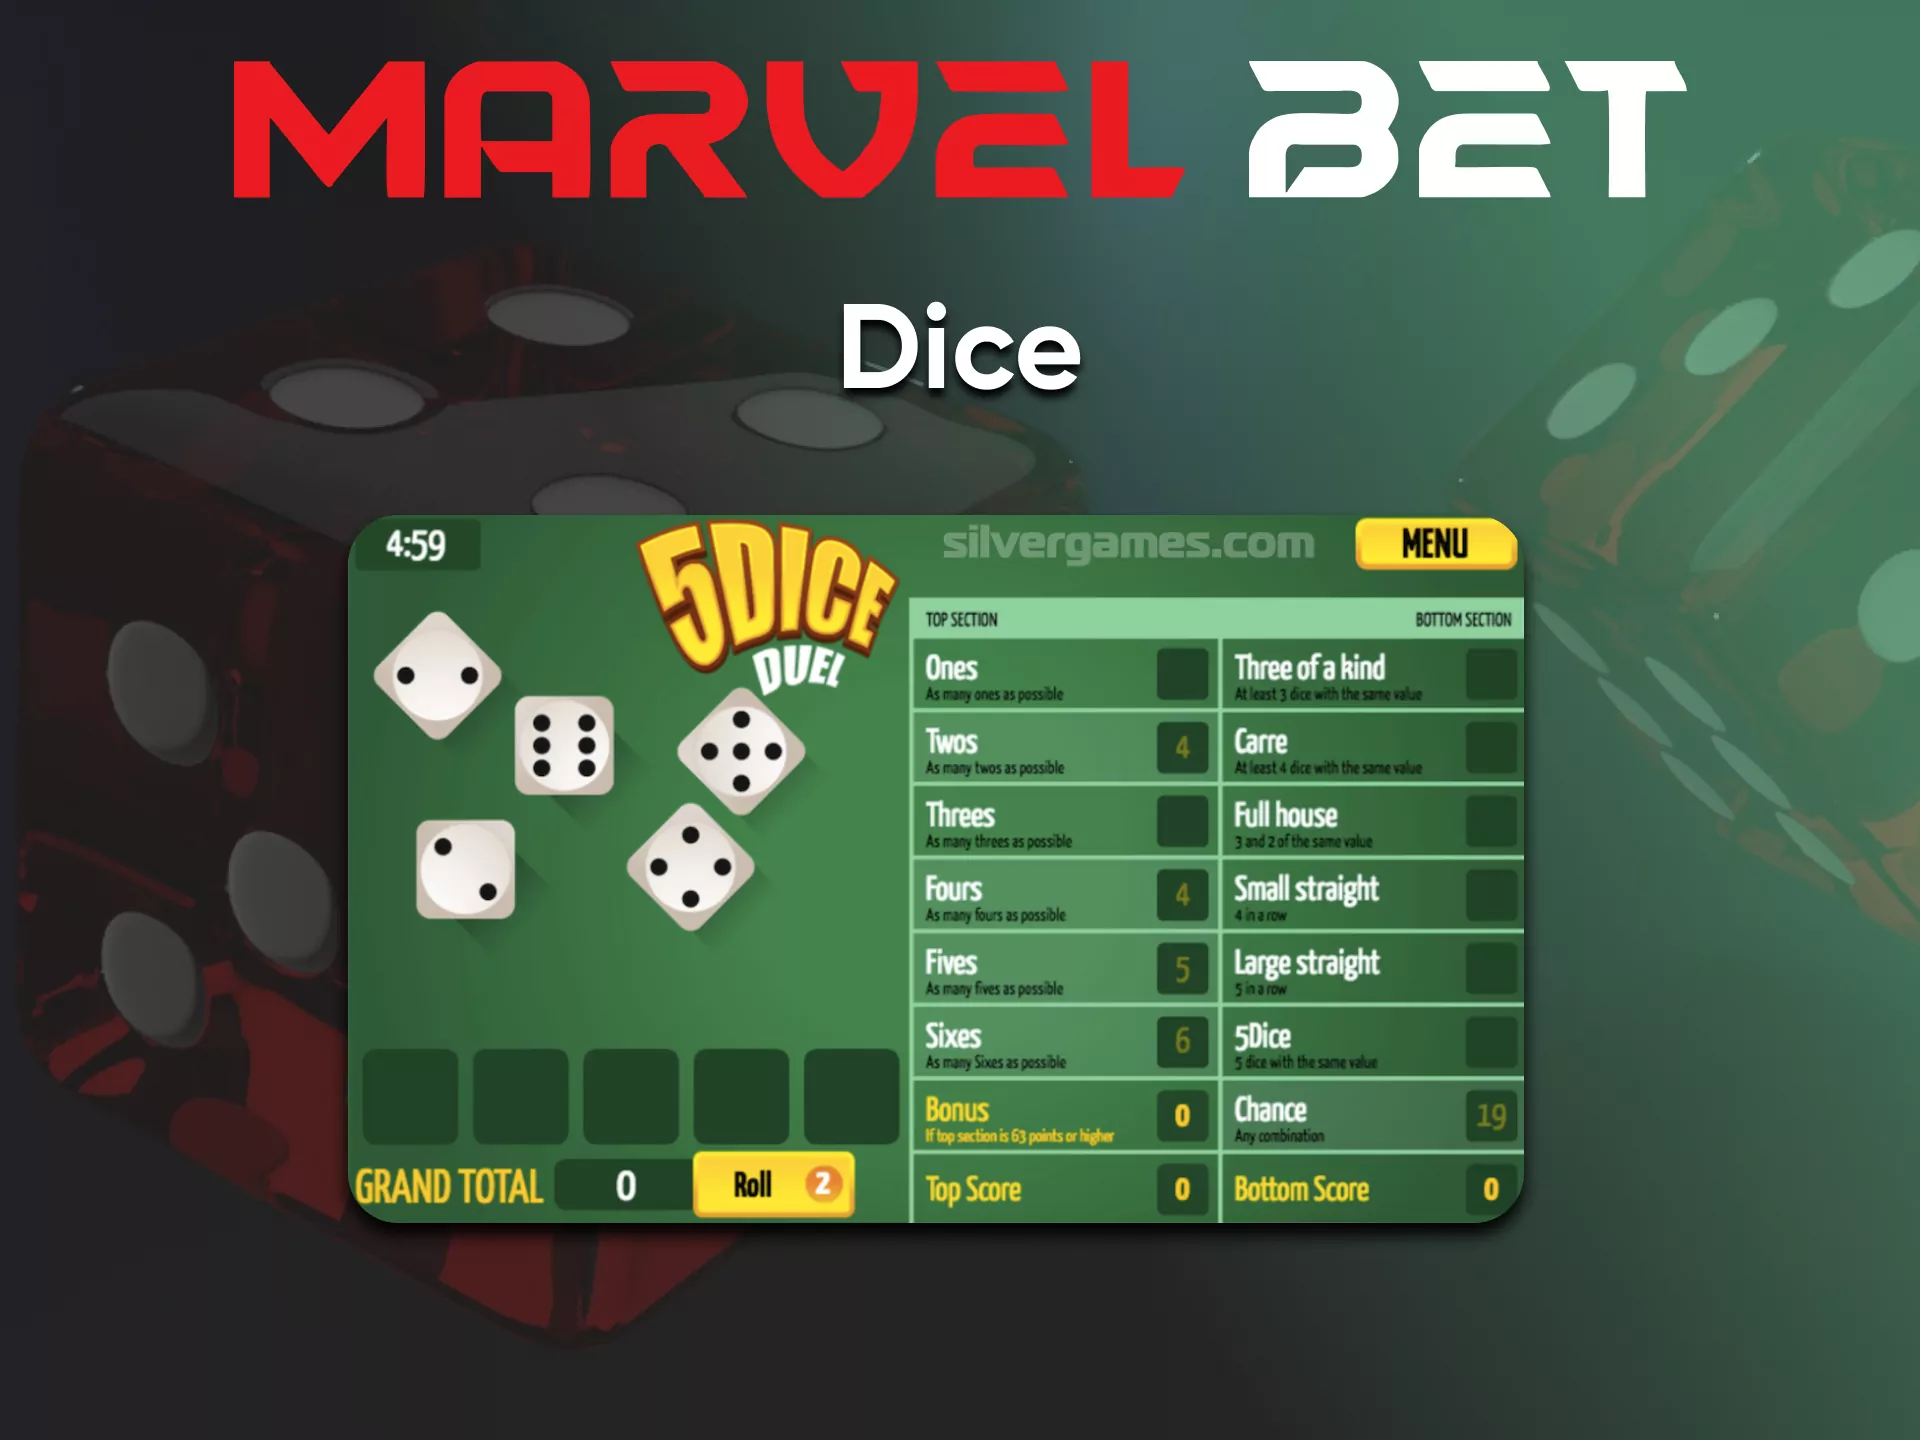 To play dice from Marvelbet, go to the Casino.